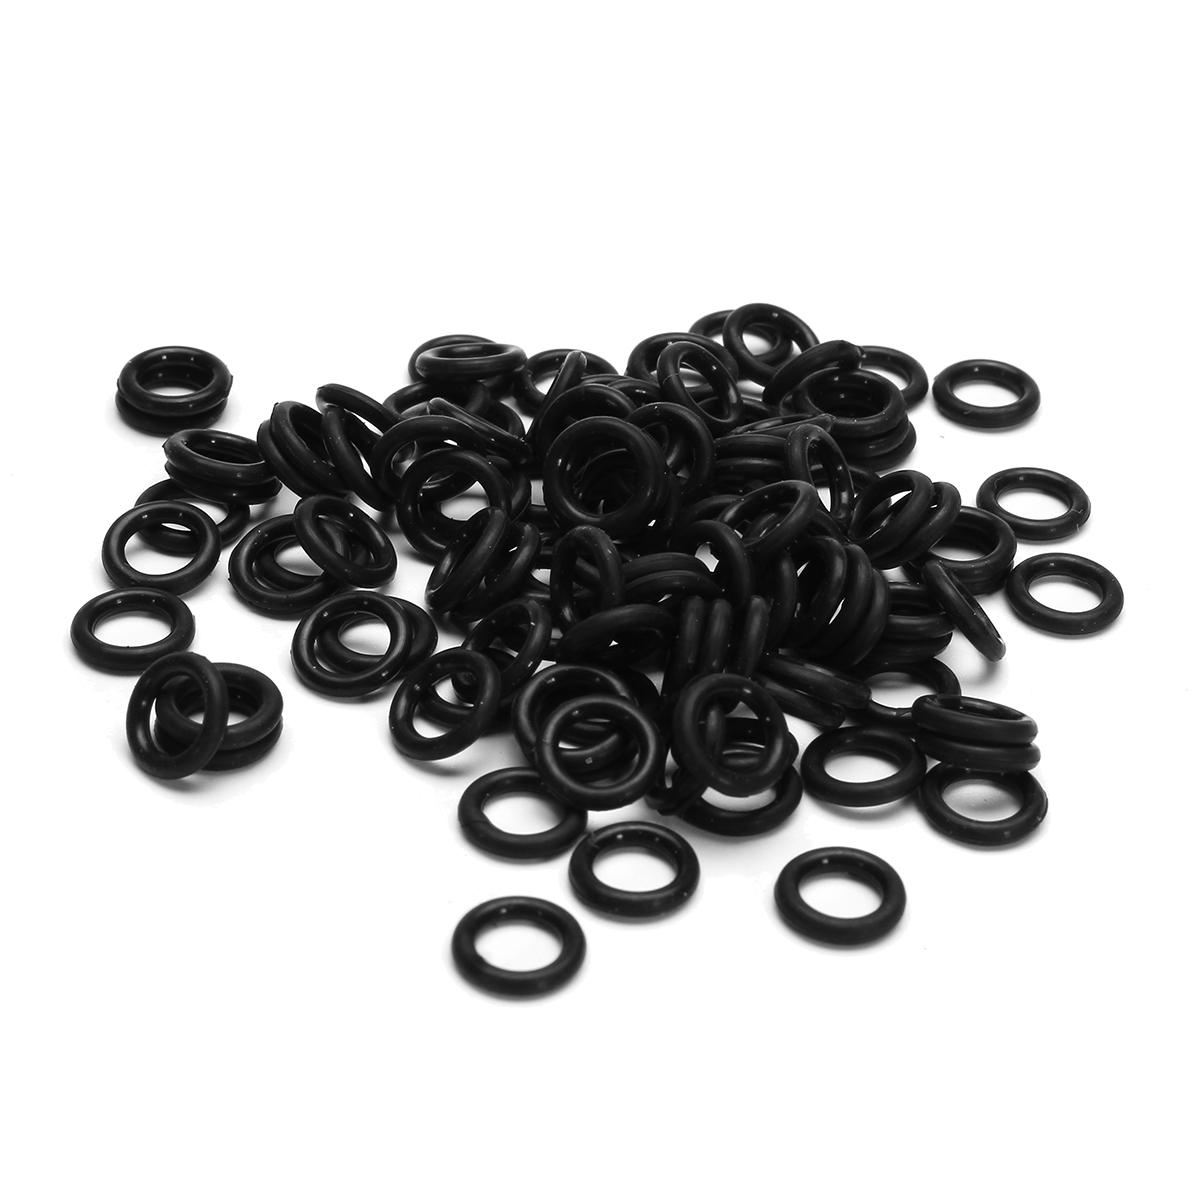 

100PCS Mechanical Keyboard Keycap Rubber O-Ring Switch Dampeners for Cherry MX